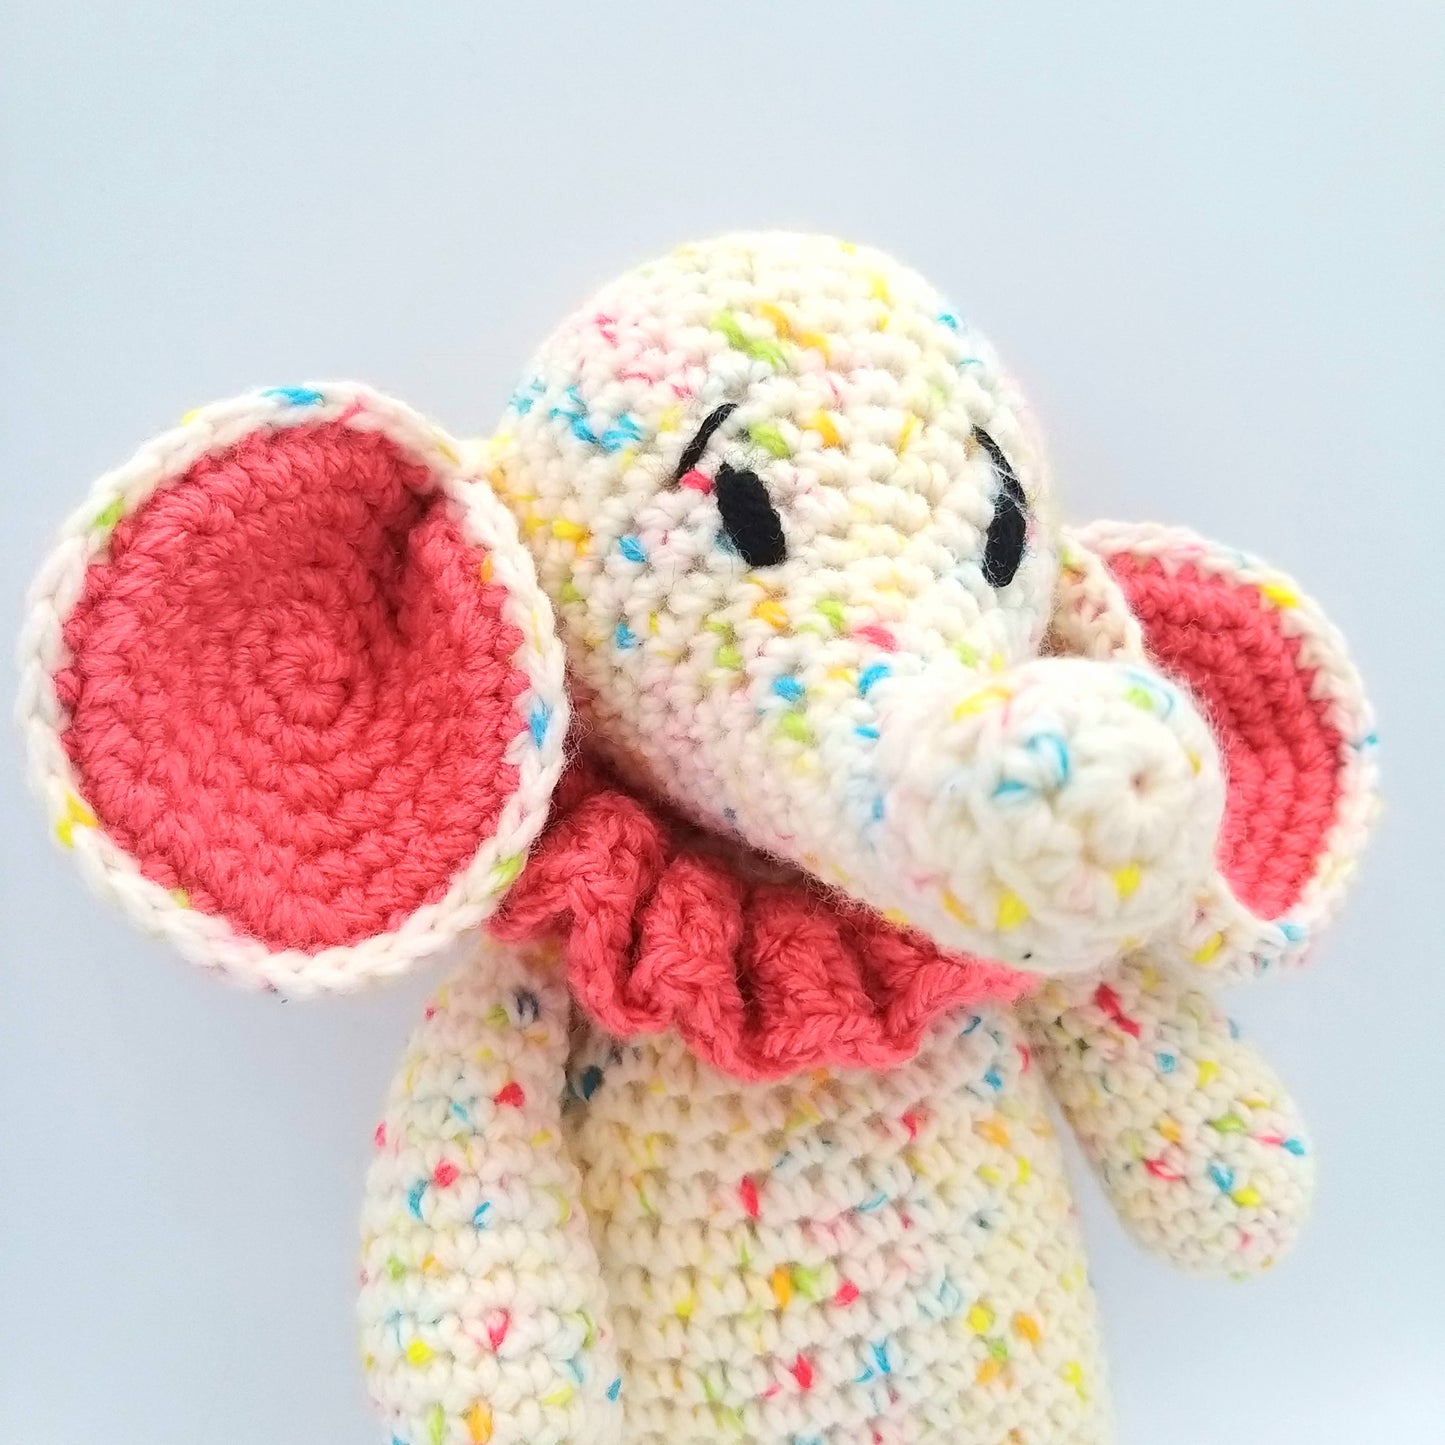 PDF Pattern - Ruffle pattern and amendments to make Special Edition Jelly Tots & Baby Dots the Elephants